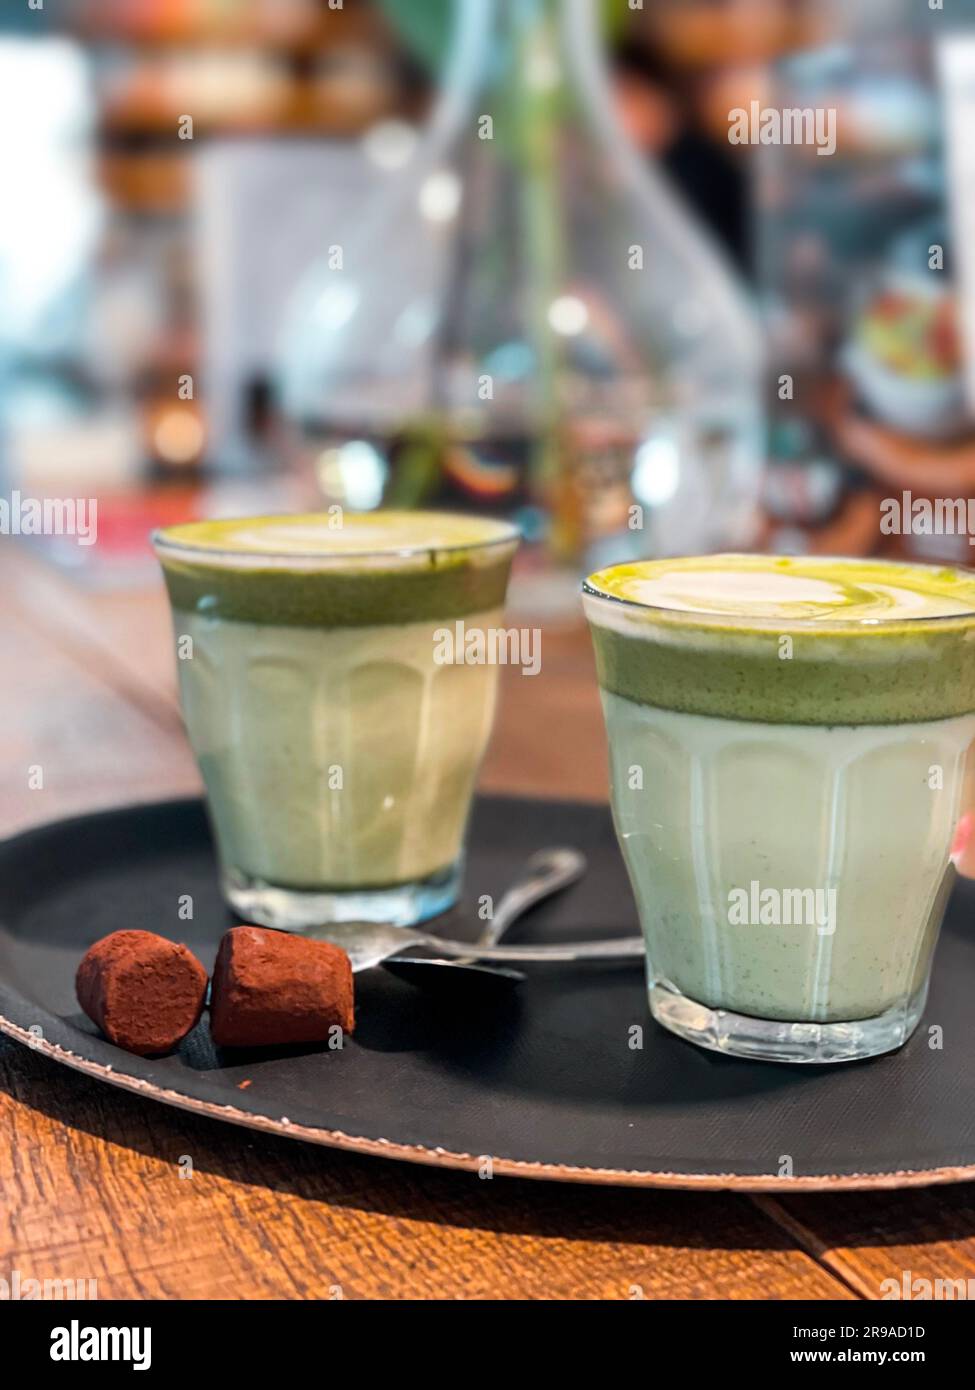 Two glass cups of matcha latte drinks on a wooden table Stock Photo